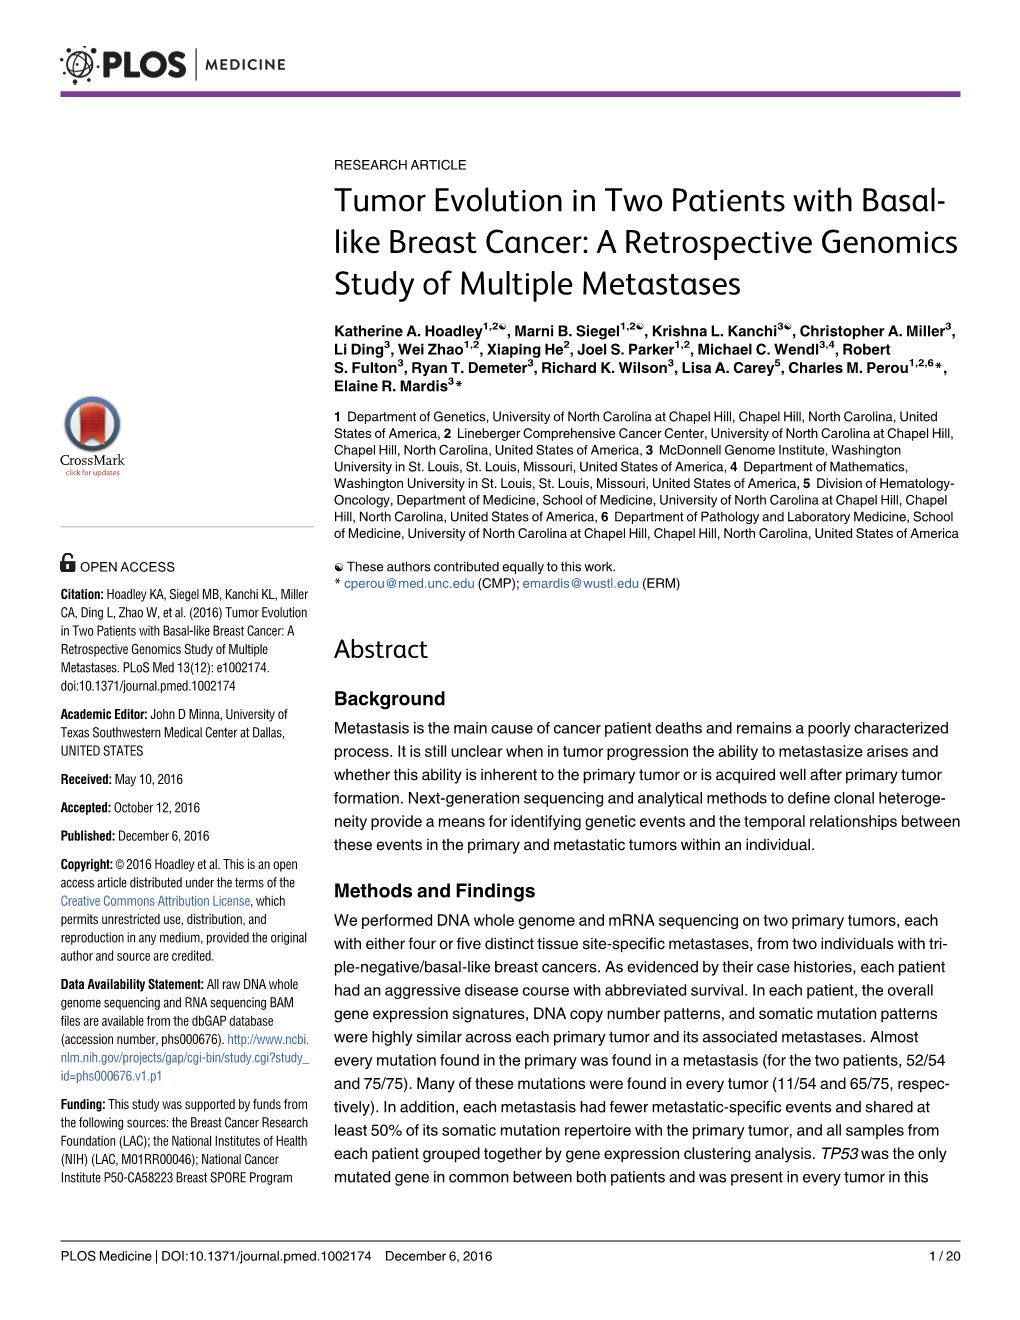 Tumor Evolution in Two Patients with Basal-Like Breast Cancer: a Retrospective Genomics Study of Multiple Abstract Metastases